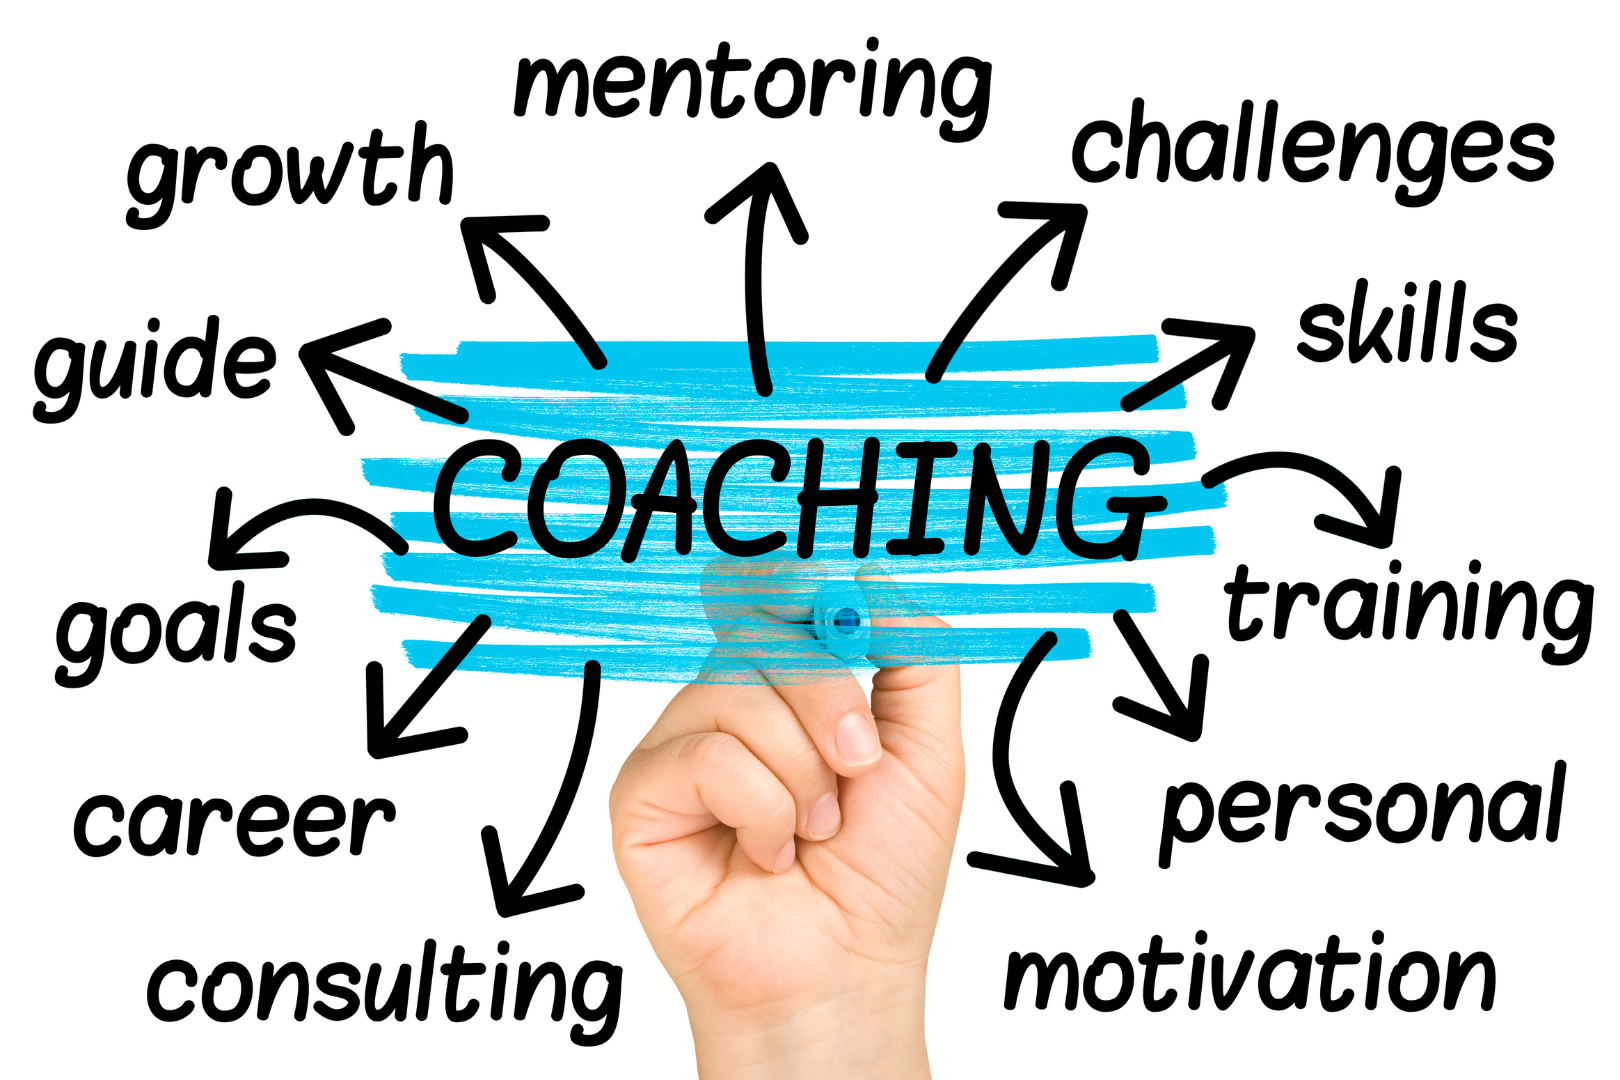 Coaching for Excellence in Mental, Emotional, and Physical Health